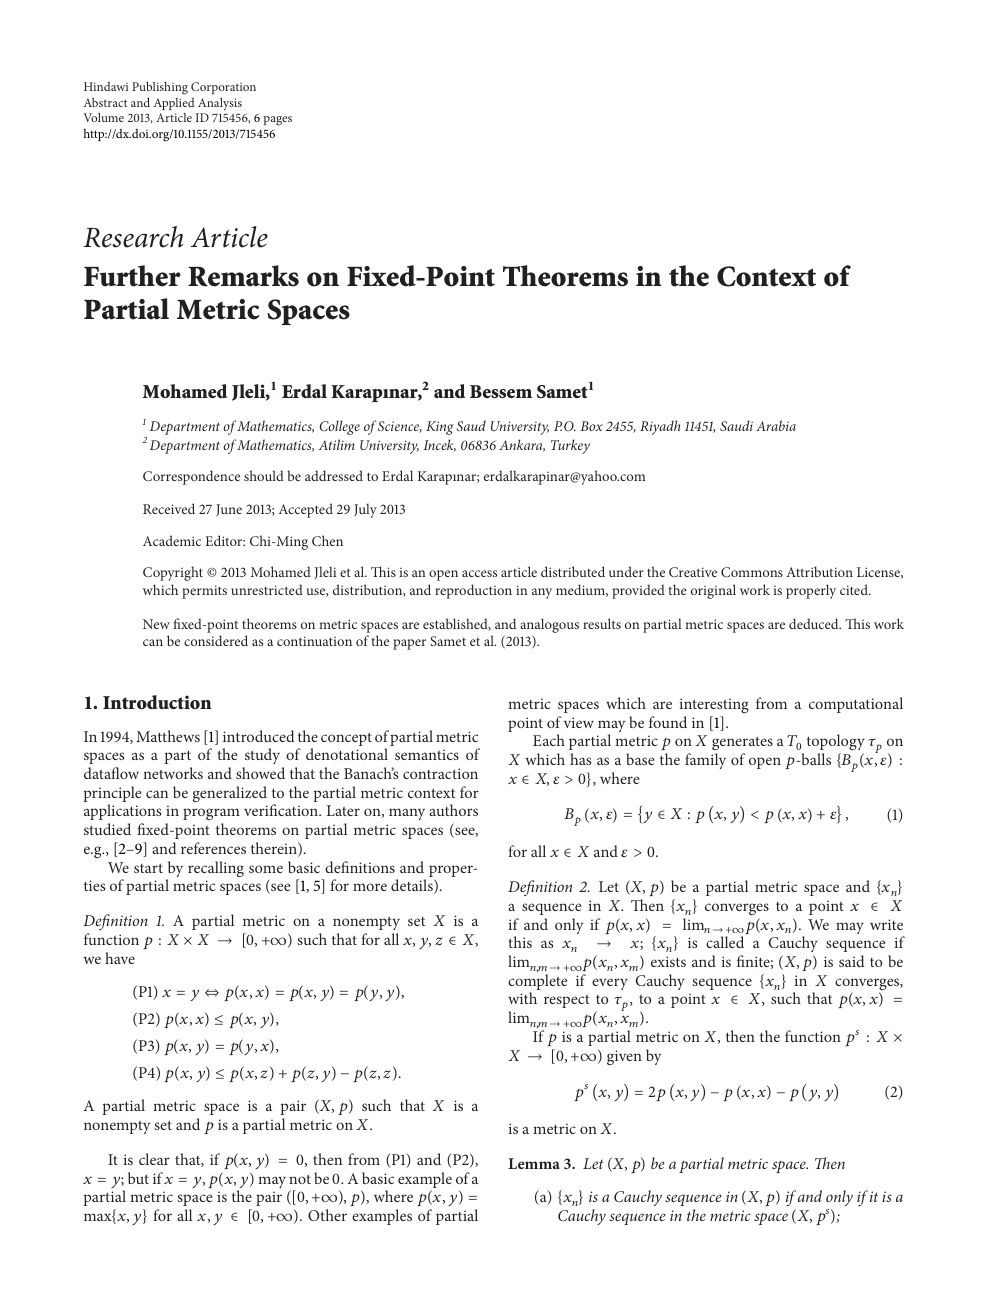 Further Remarks On Fixed Point Theorems In The Context Of Partial Metric Spaces Topic Of Research Paper In Mathematics Download Scholarly Article Pdf And Read For Free On Cyberleninka Open Science Hub